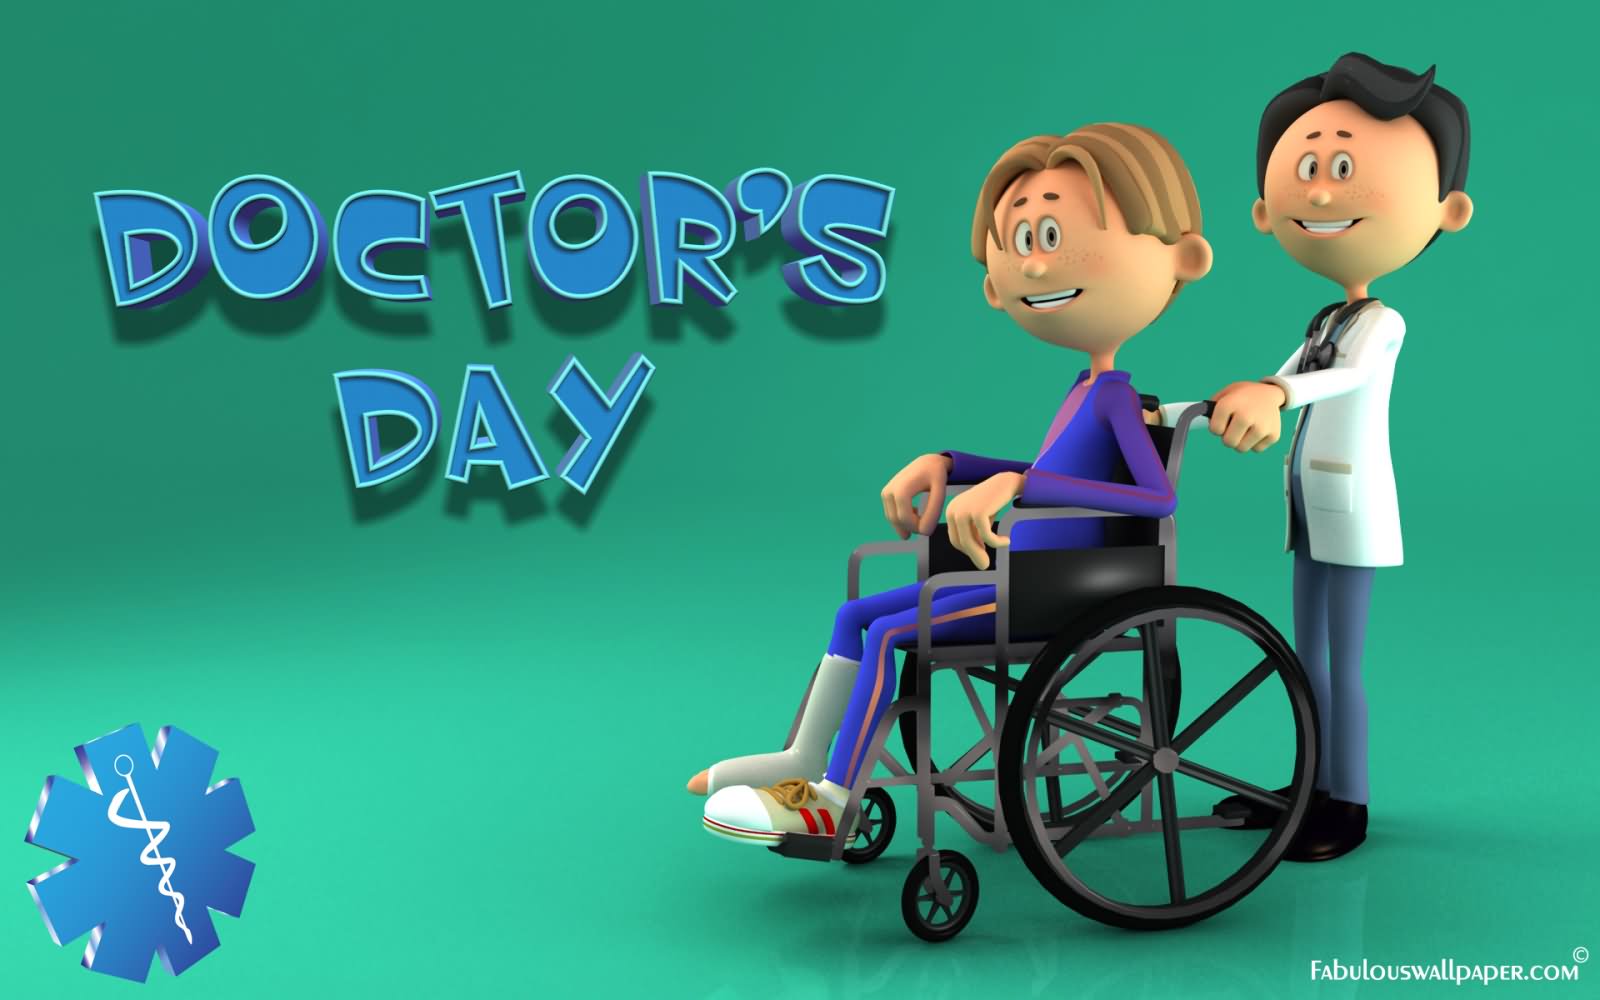 National Doctor's Day Greetings Image